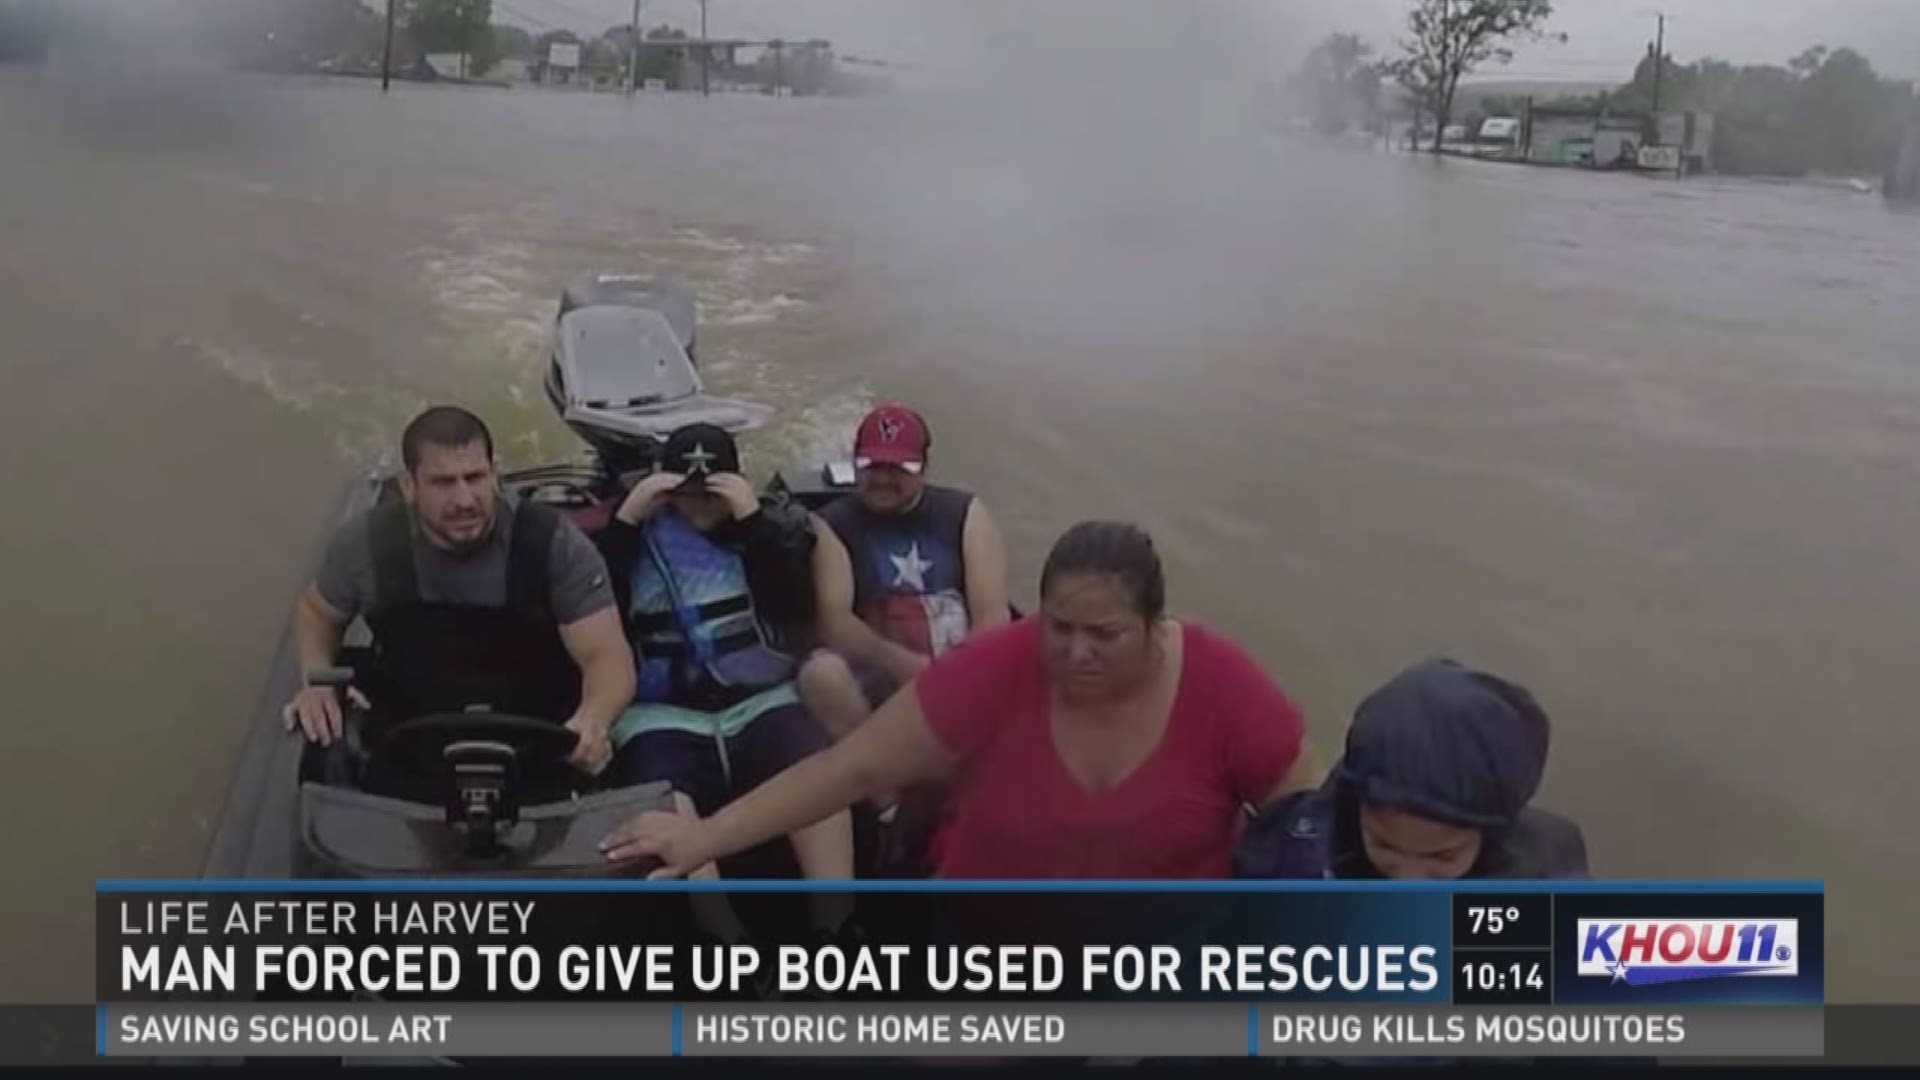 A Houston man rescued dozens of people during Hurricane Harvey, only to have his boat destroyed by looters.